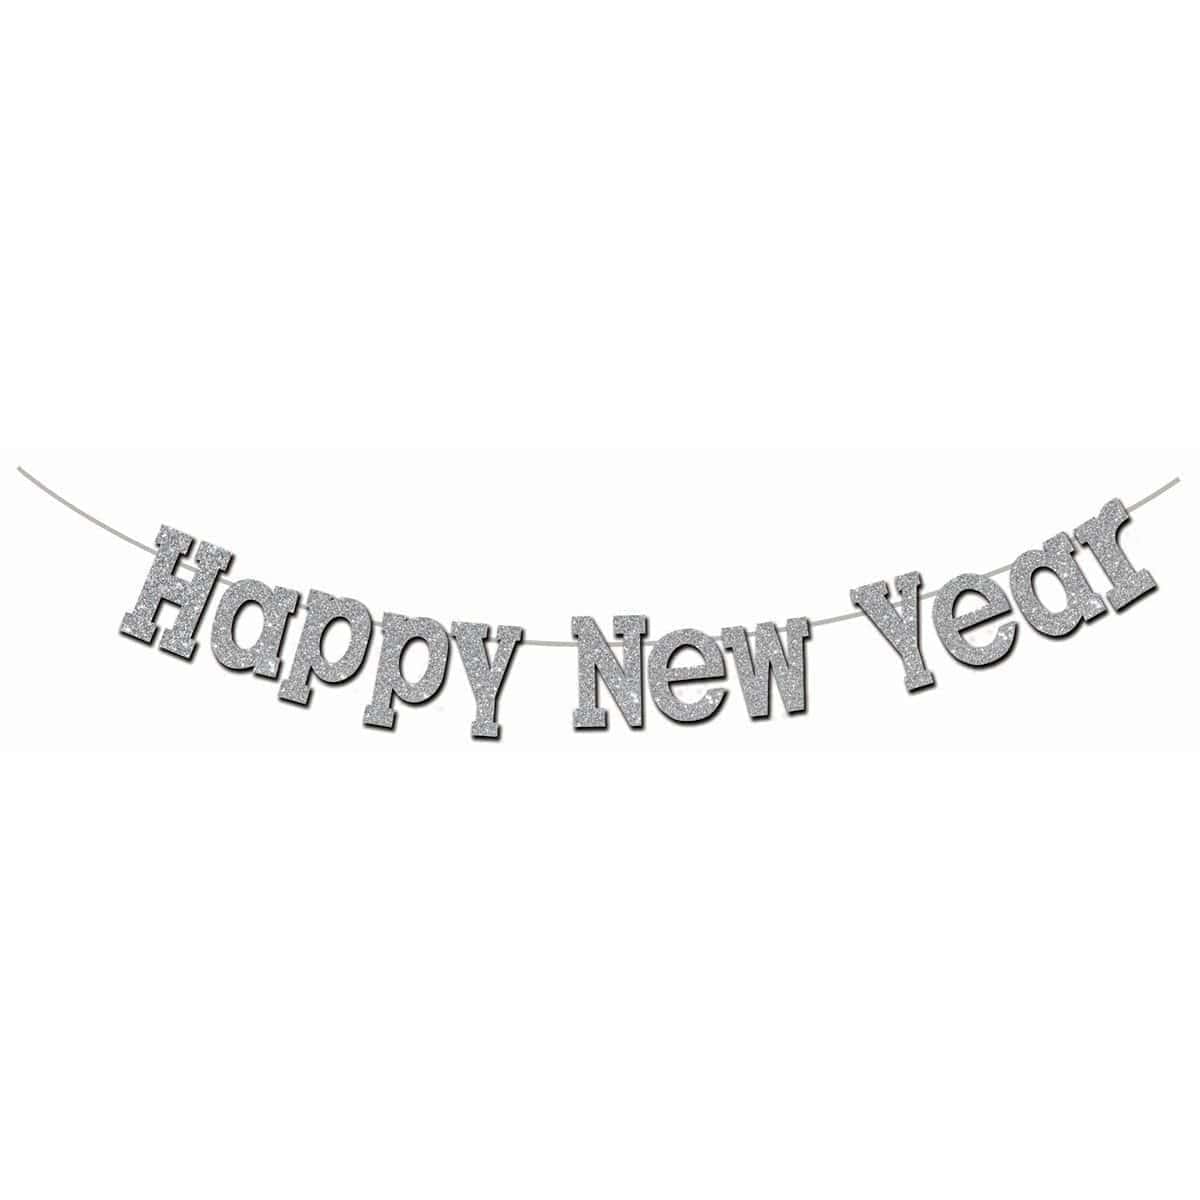 Buy New Year Happy New Year Banner 7 In. - Silver sold at Party Expert